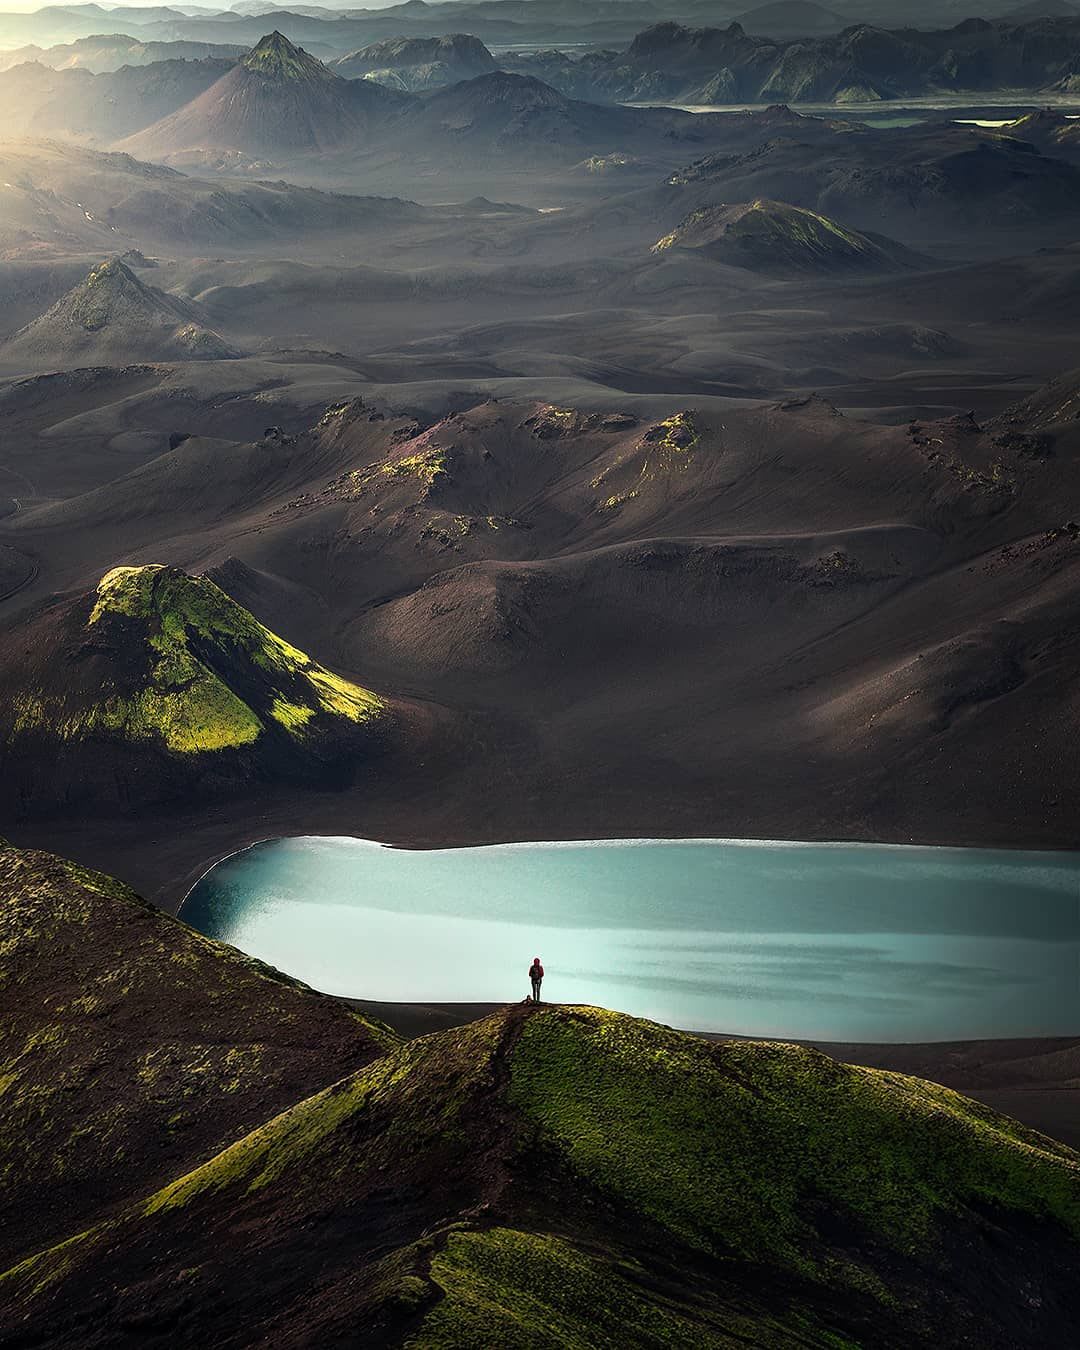 Earth or Mars??? The highlands of Iceland.